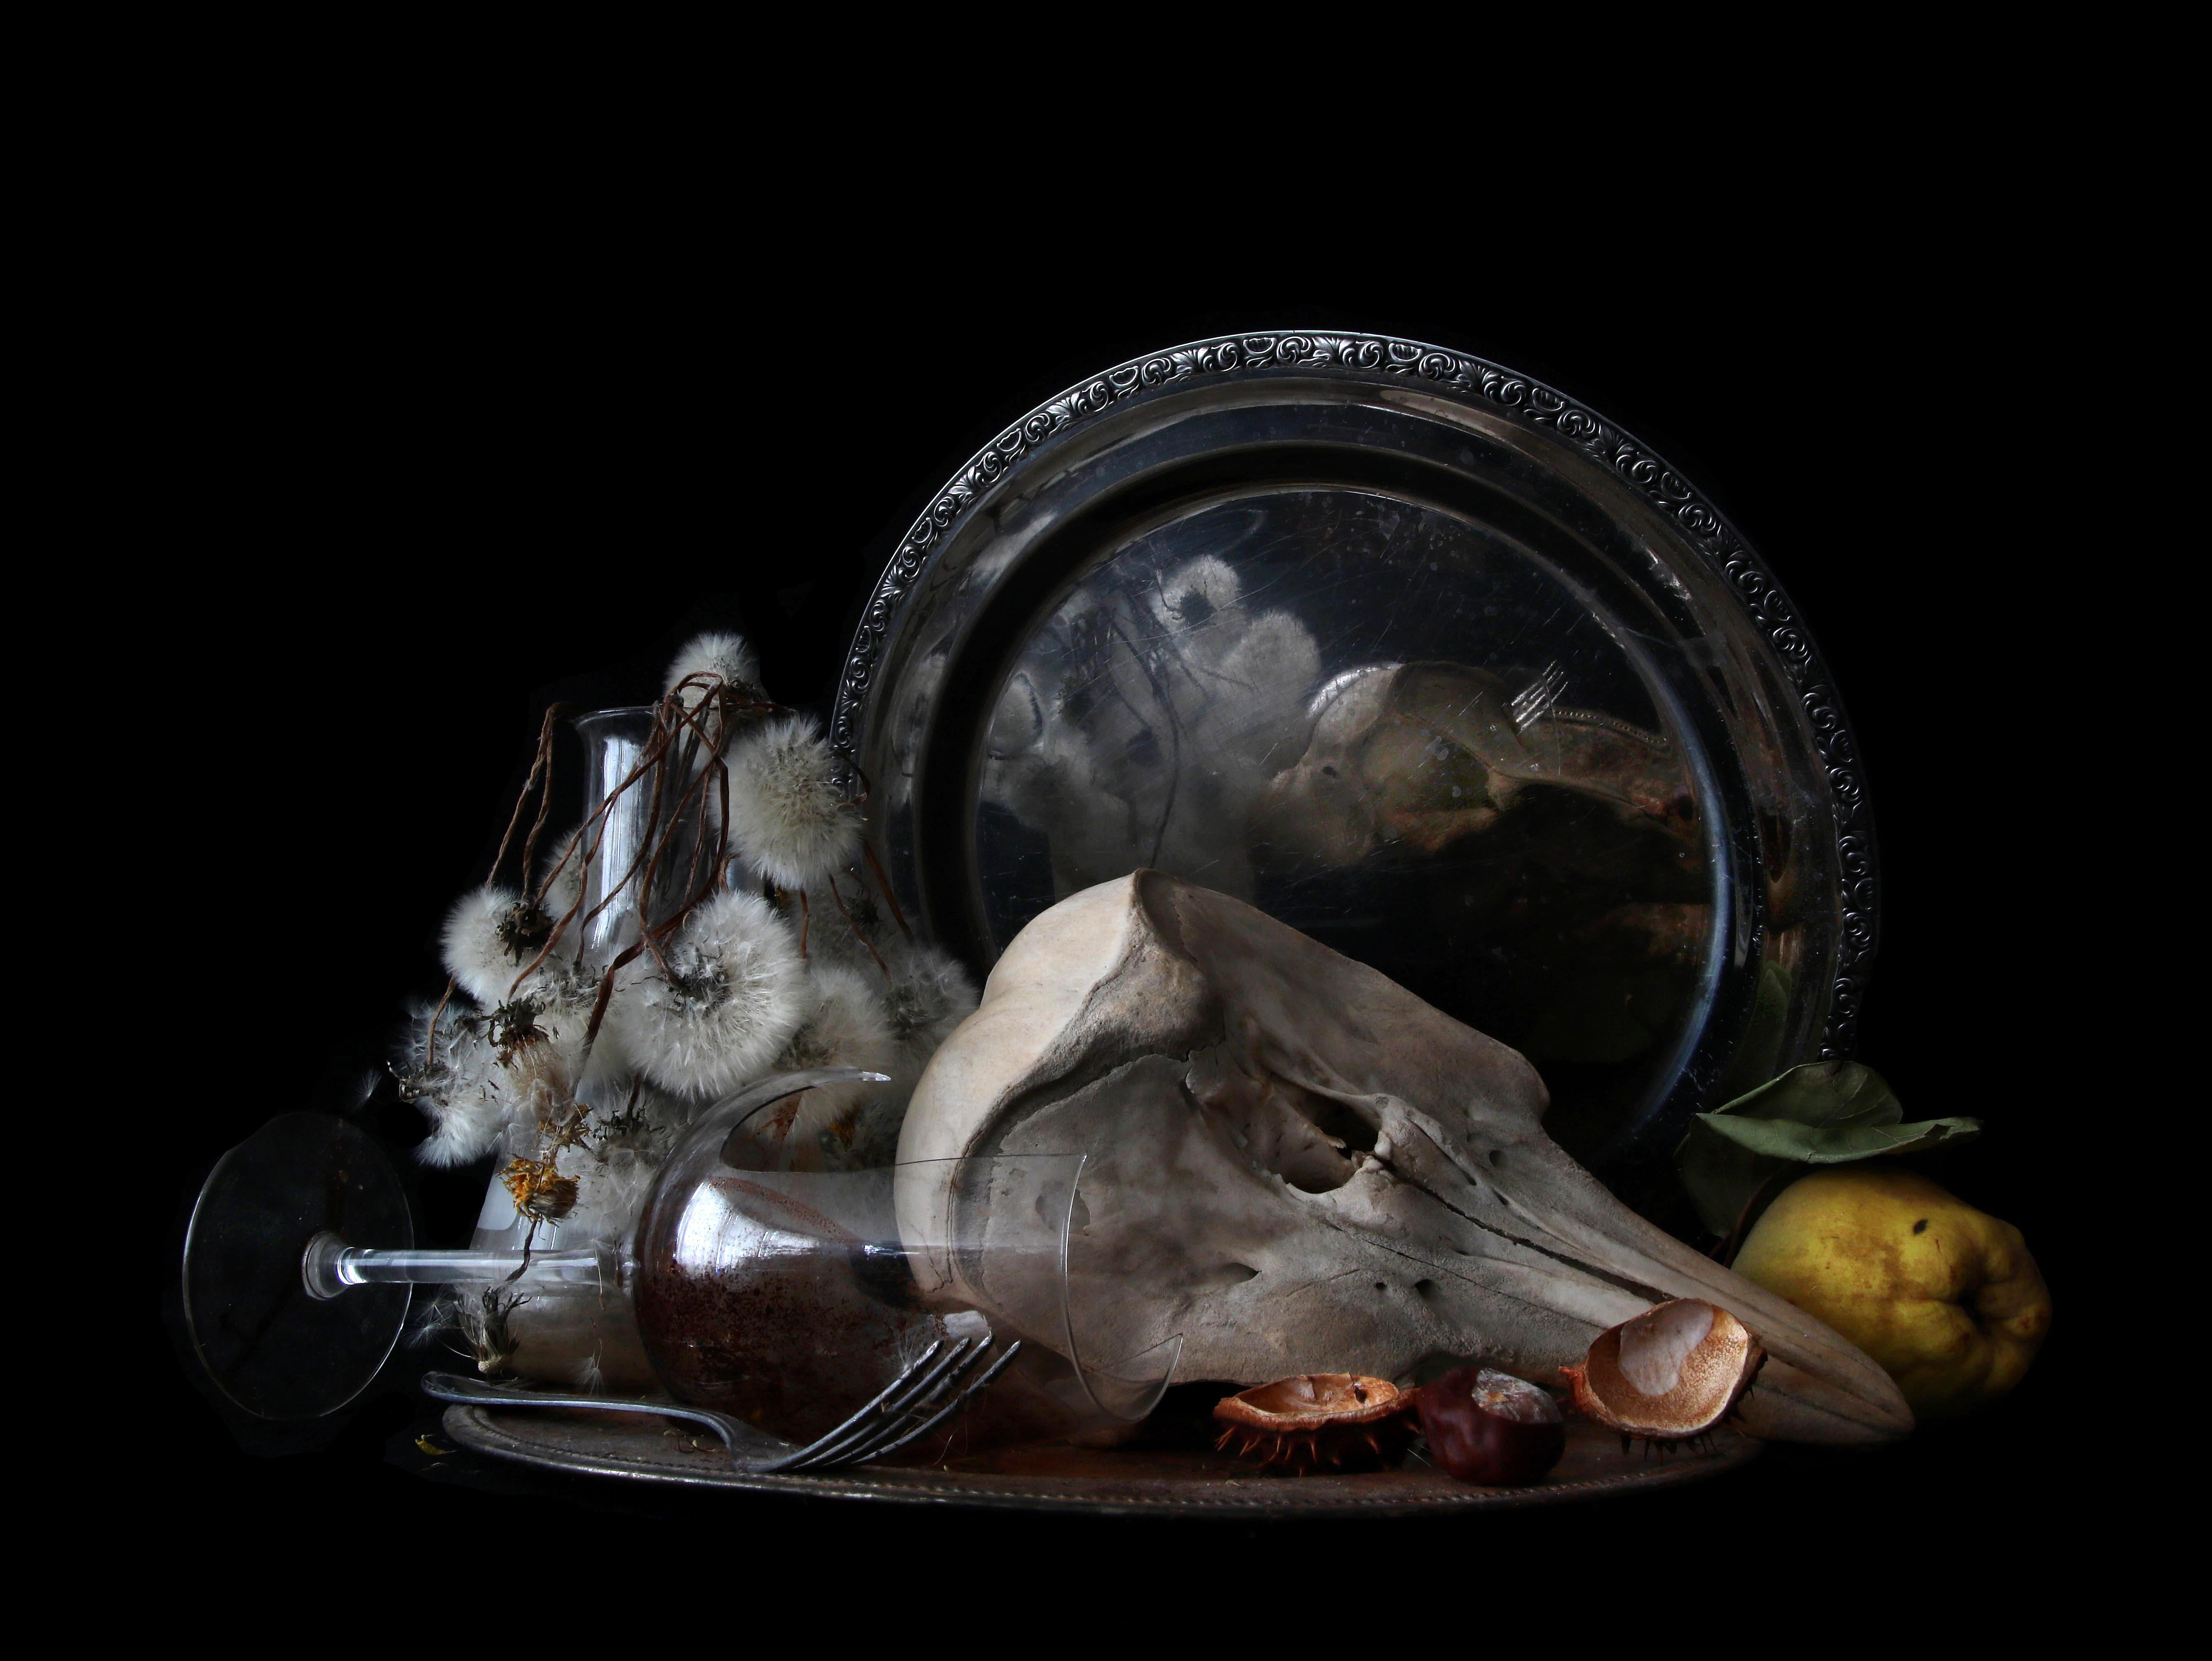 From the series "Natura Morte" still life:
The photographic image of the withered flowers, rotten fruit, animal bones and broken glasses seems to preserve the objects, keep them alive and thus point them beyond dea

Hand signed